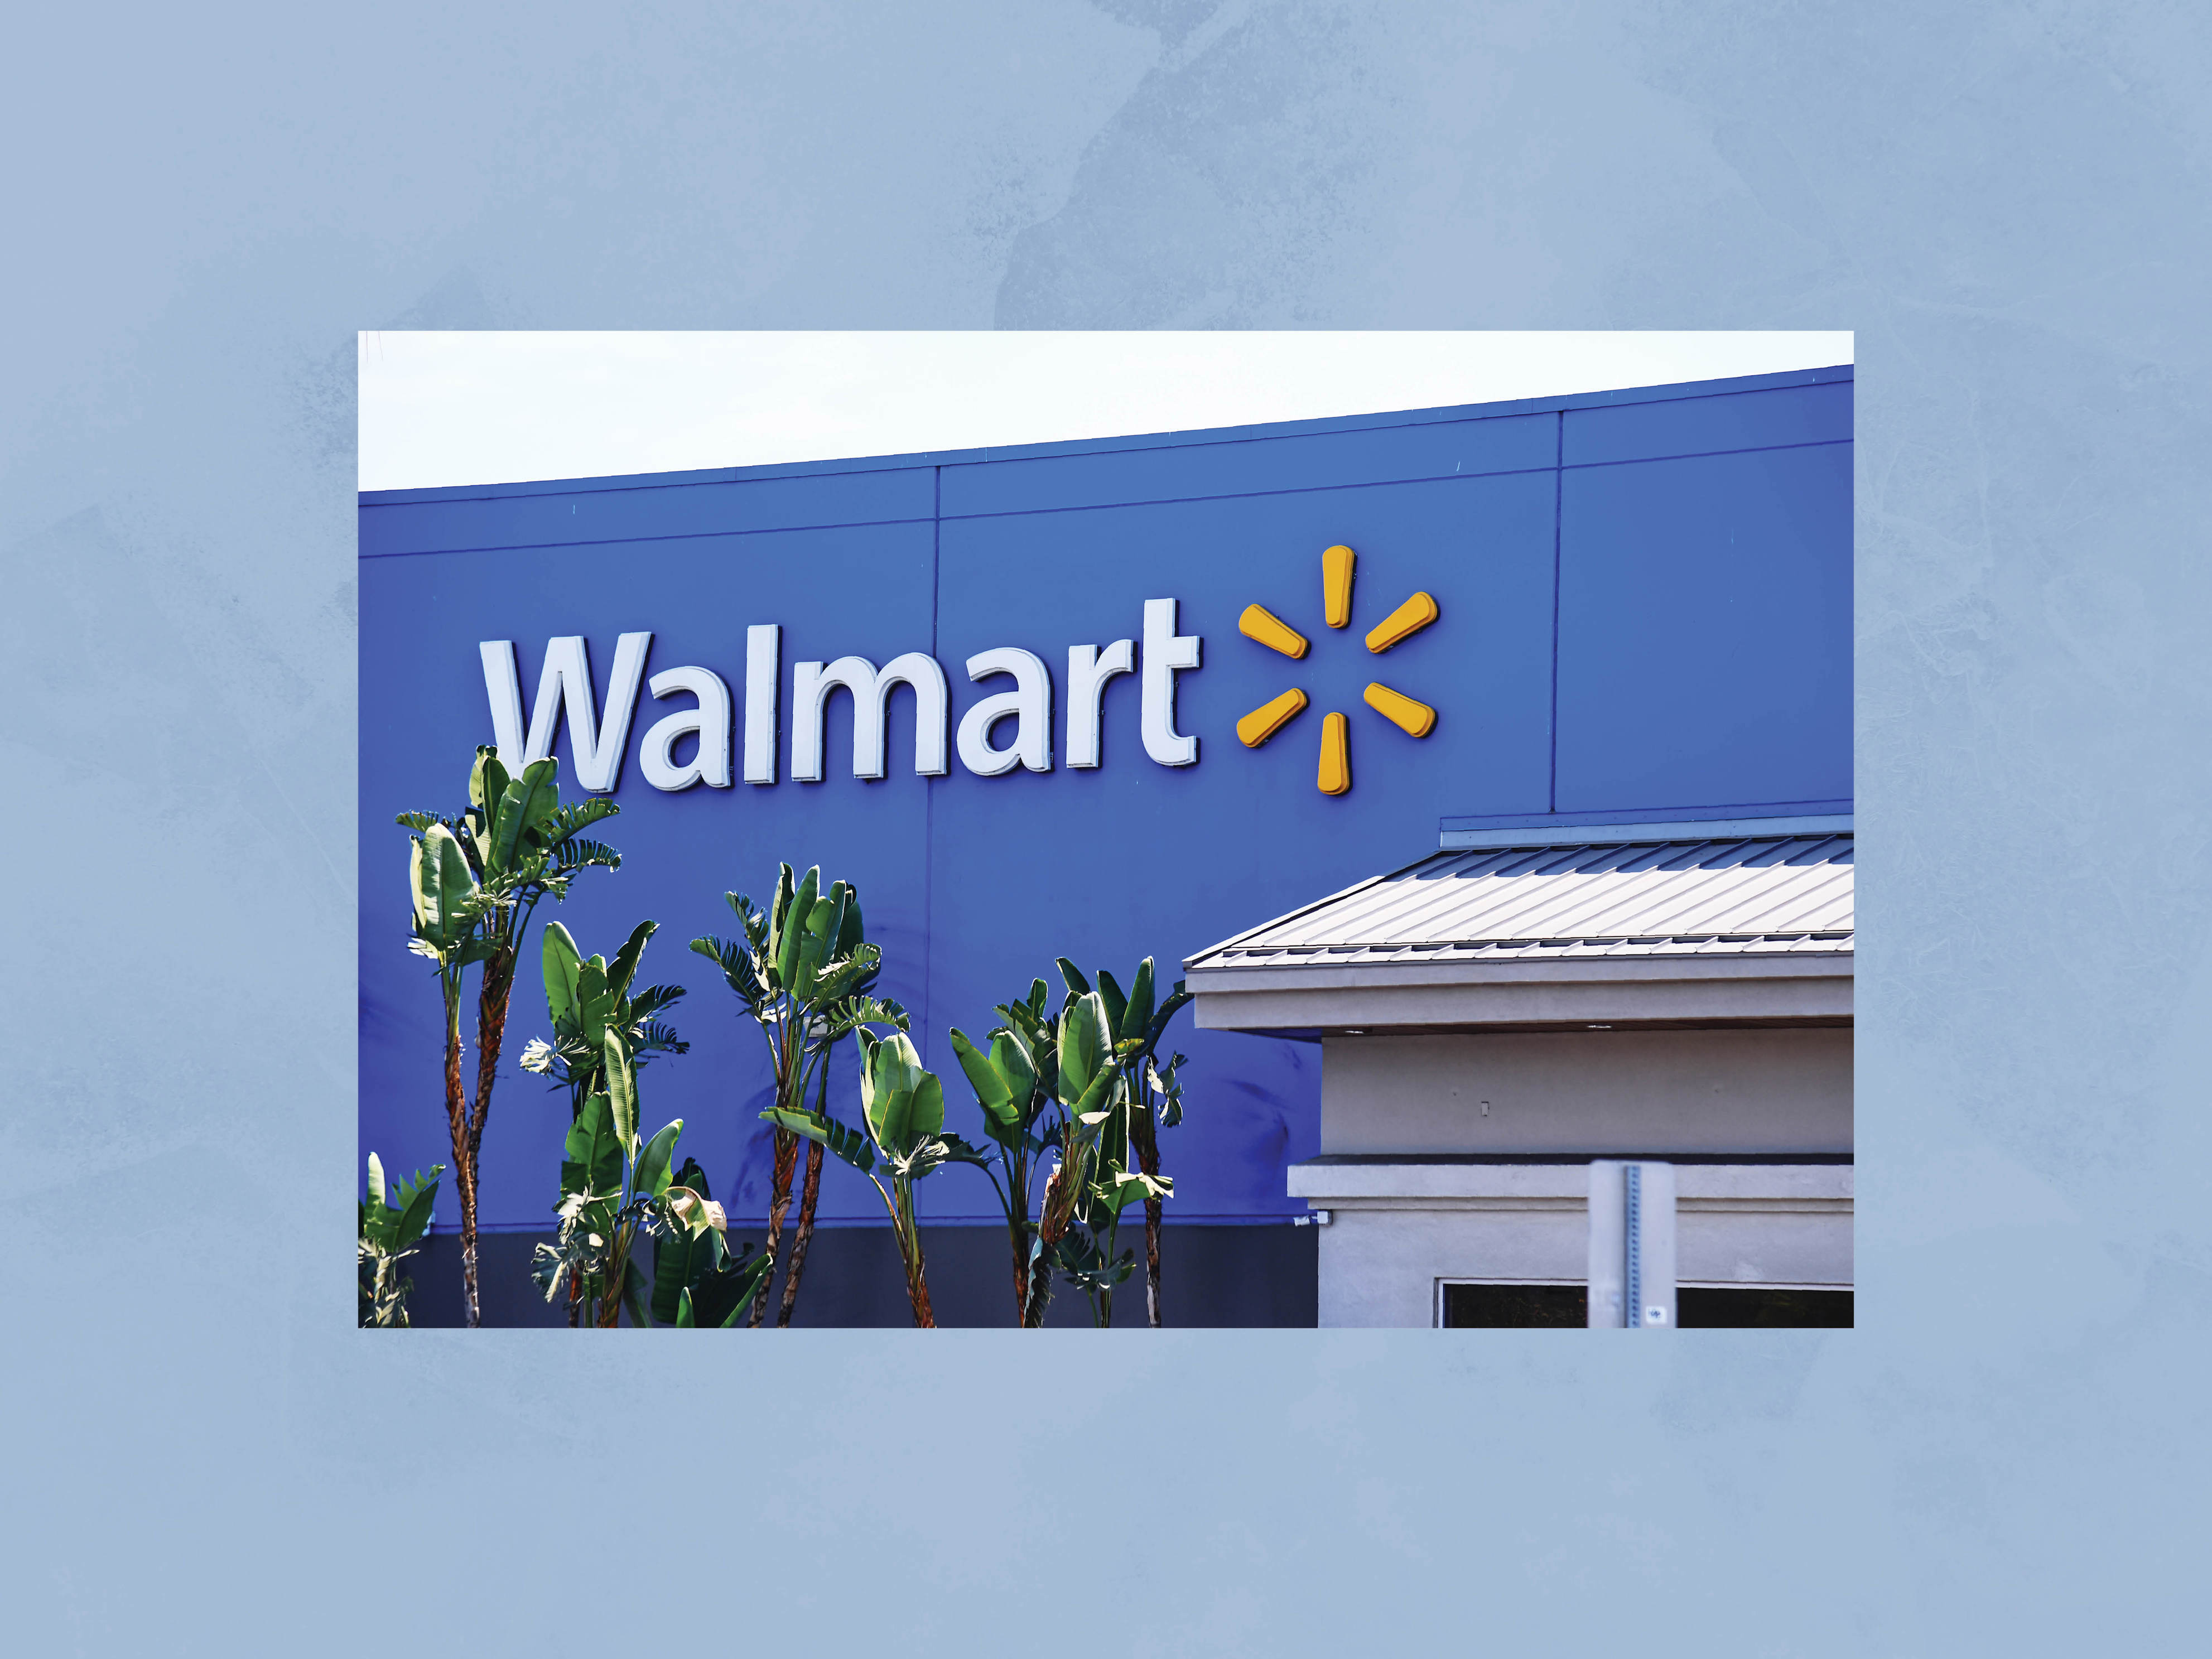 Walmart Deals Holiday Kickoff Has Thousands of Discounts That'll Give